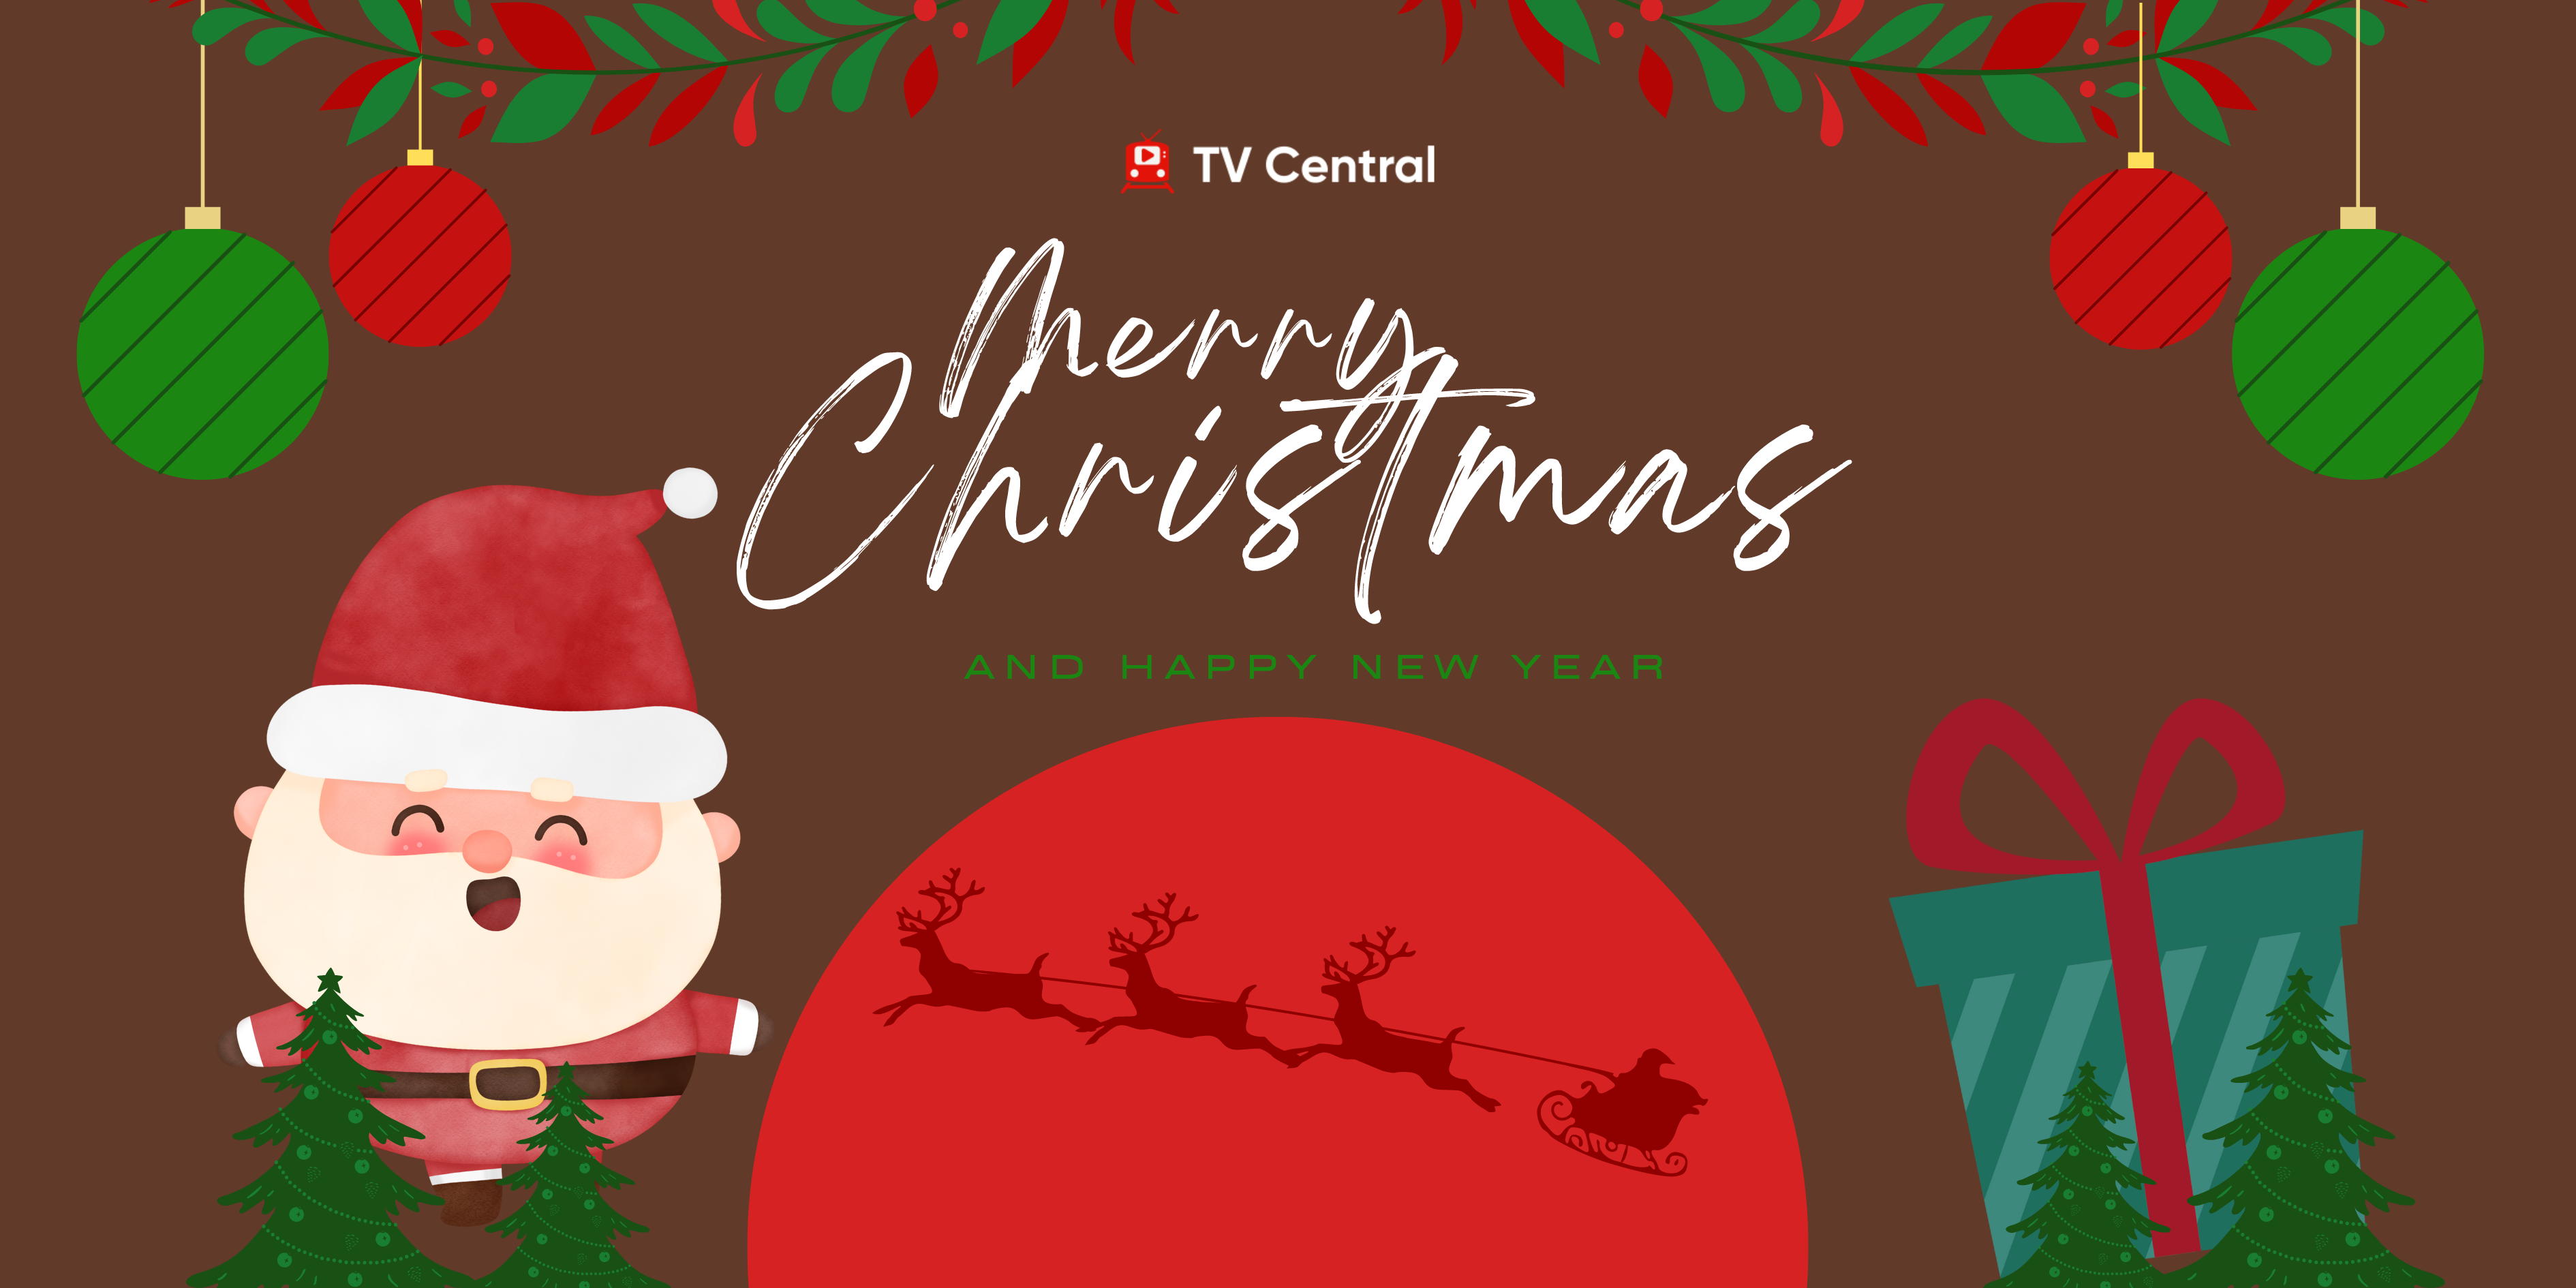 Merry Christmas from TV Central